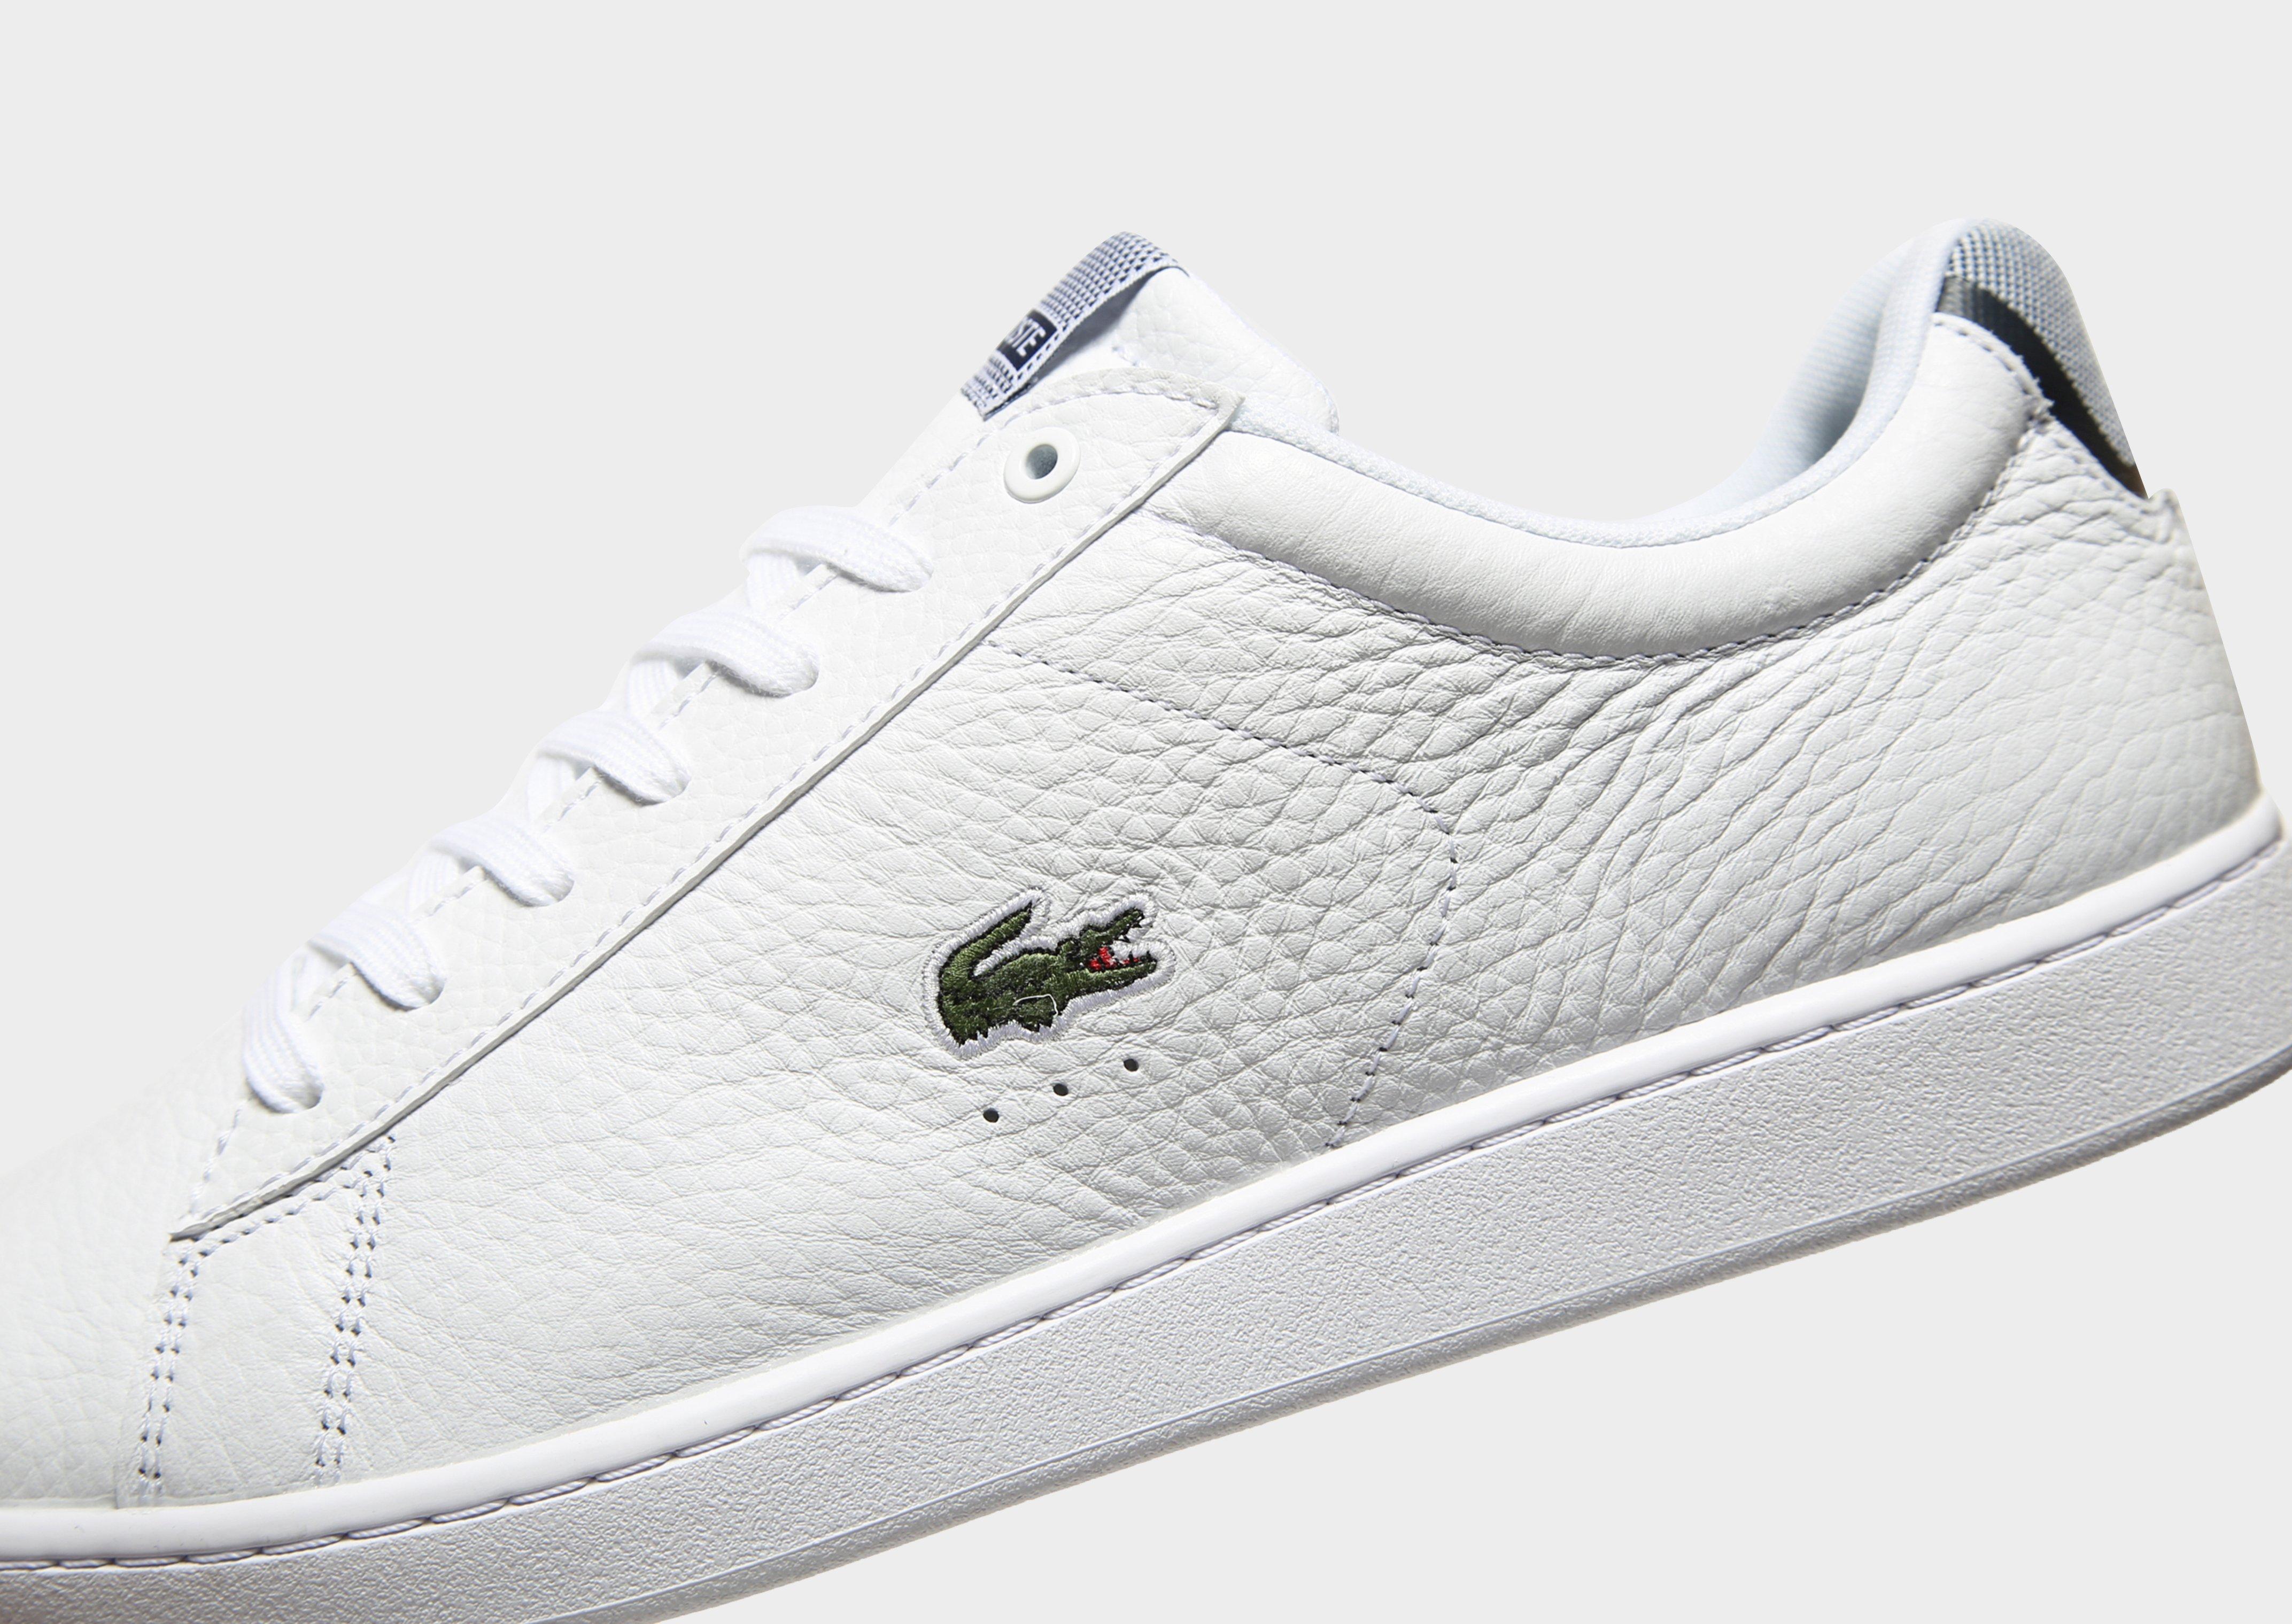 lacoste shoes carnaby evo